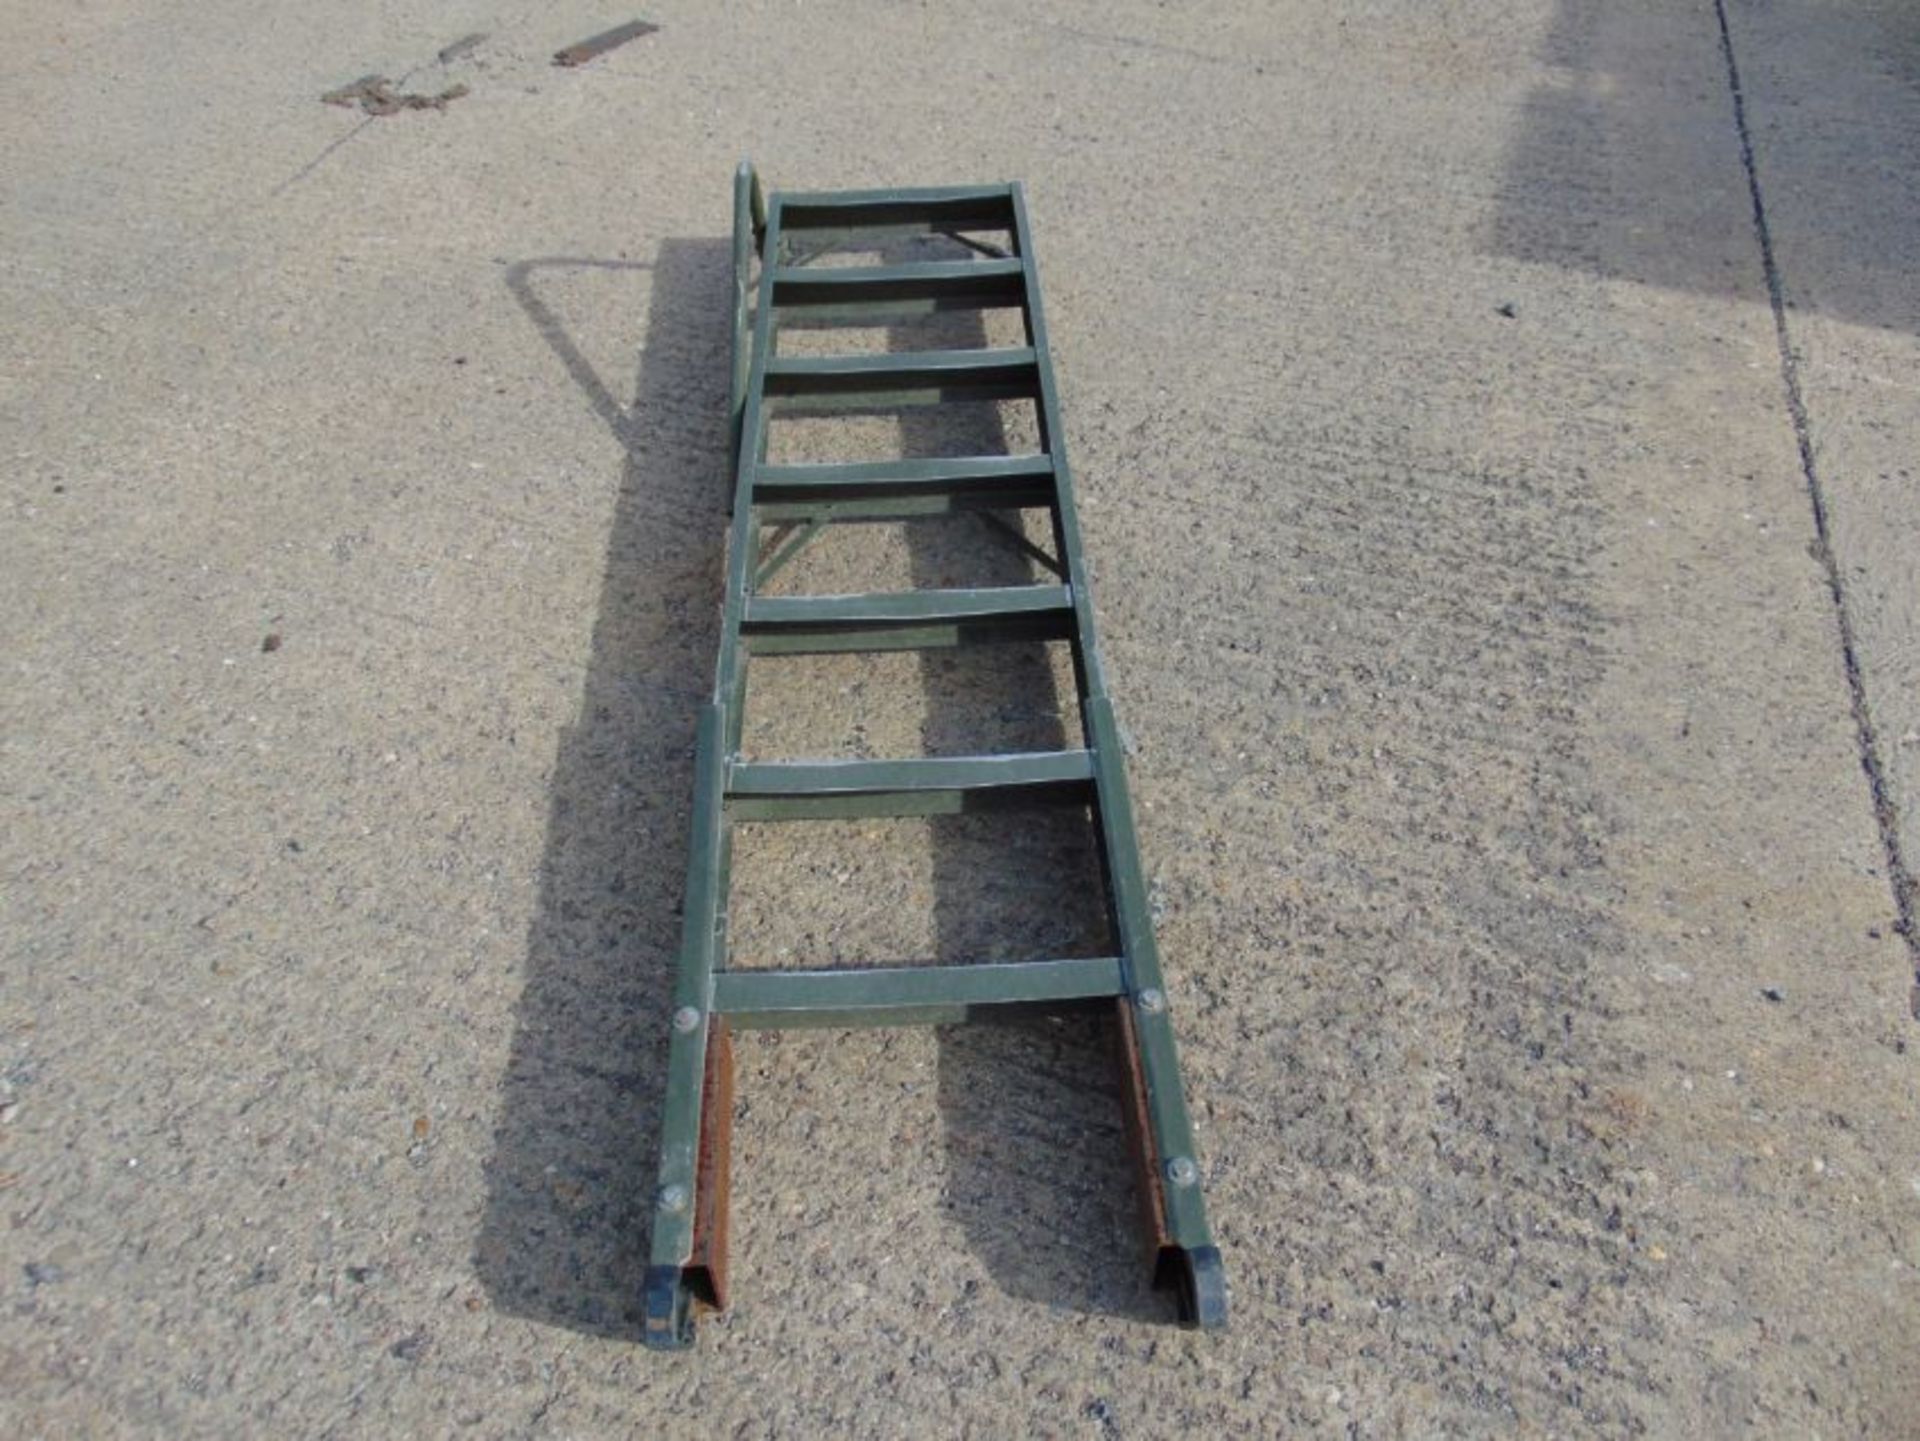 Vehicle Access Ladder - Image 2 of 4